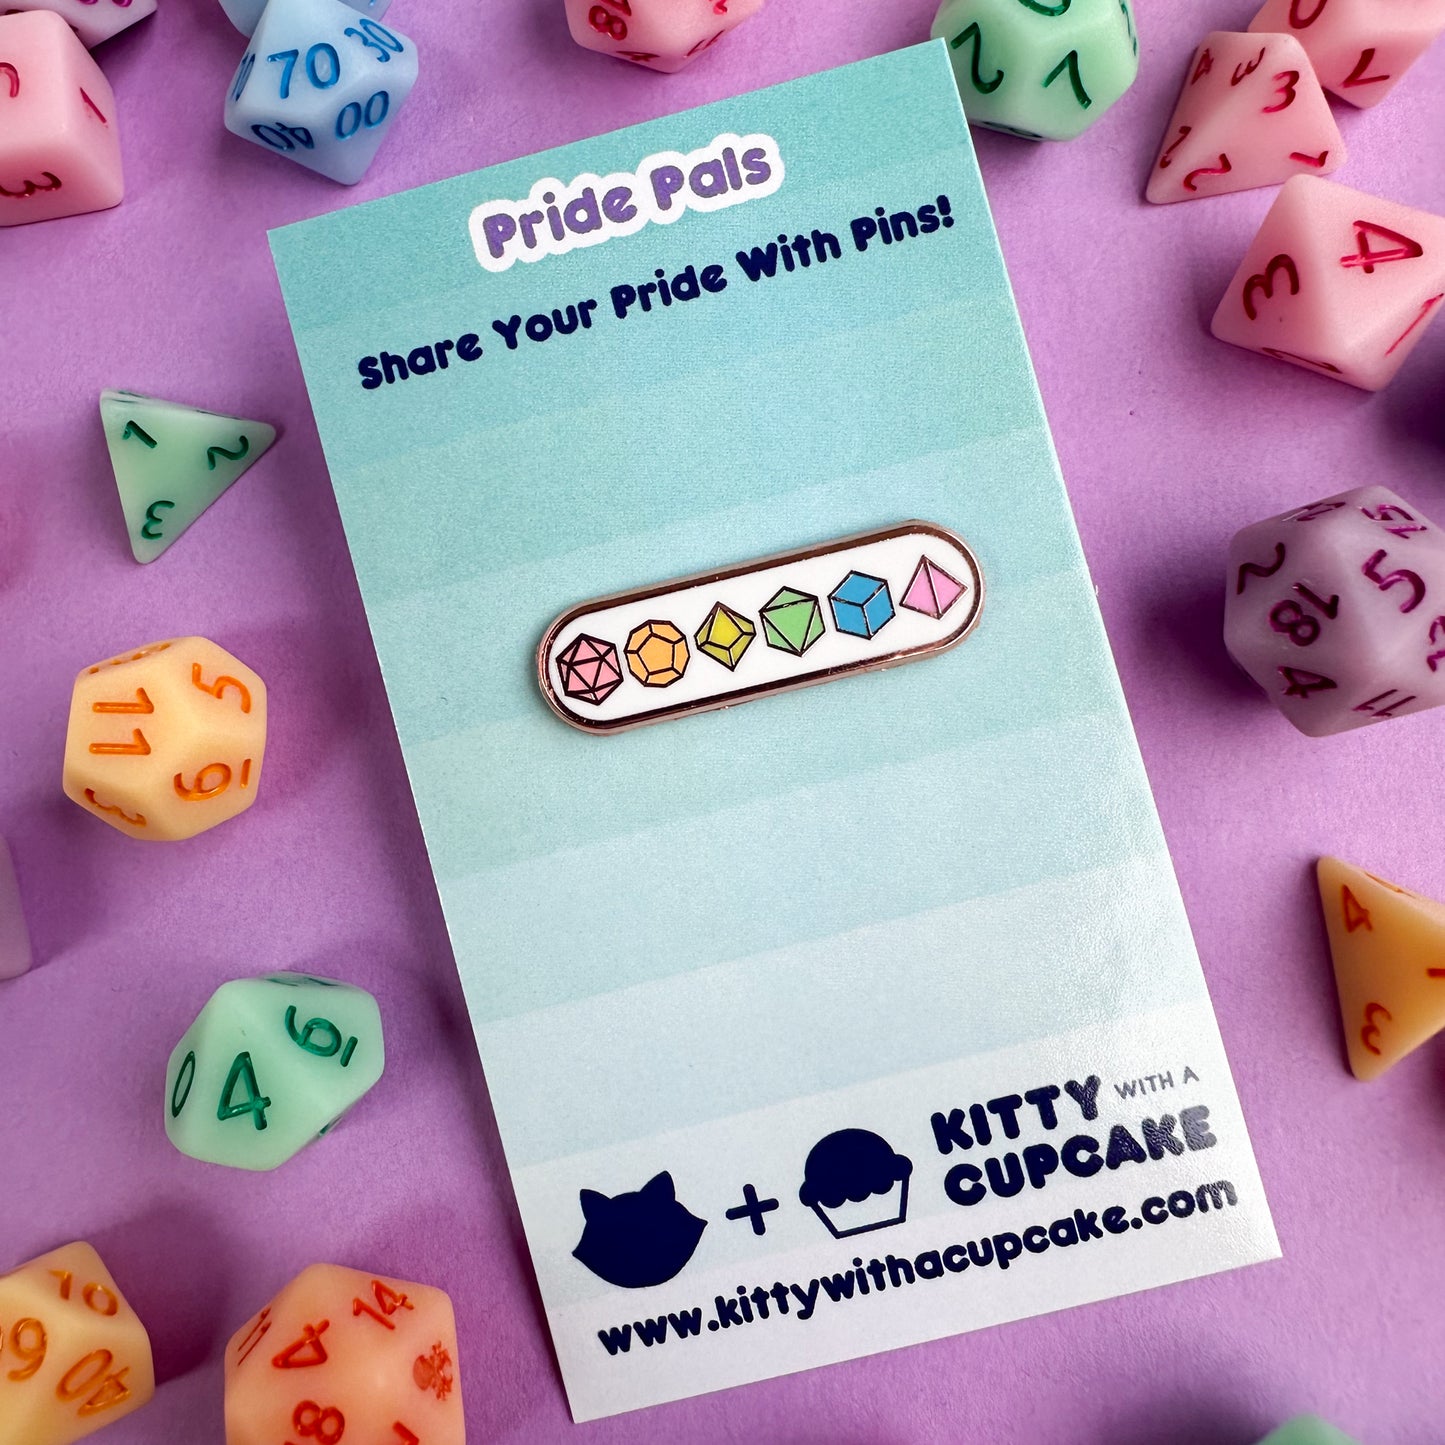 An enamel pin on a card the pin has pastel polyhedral dice on it. There are real pastel polyhedral dice around the card on lavender paper. 